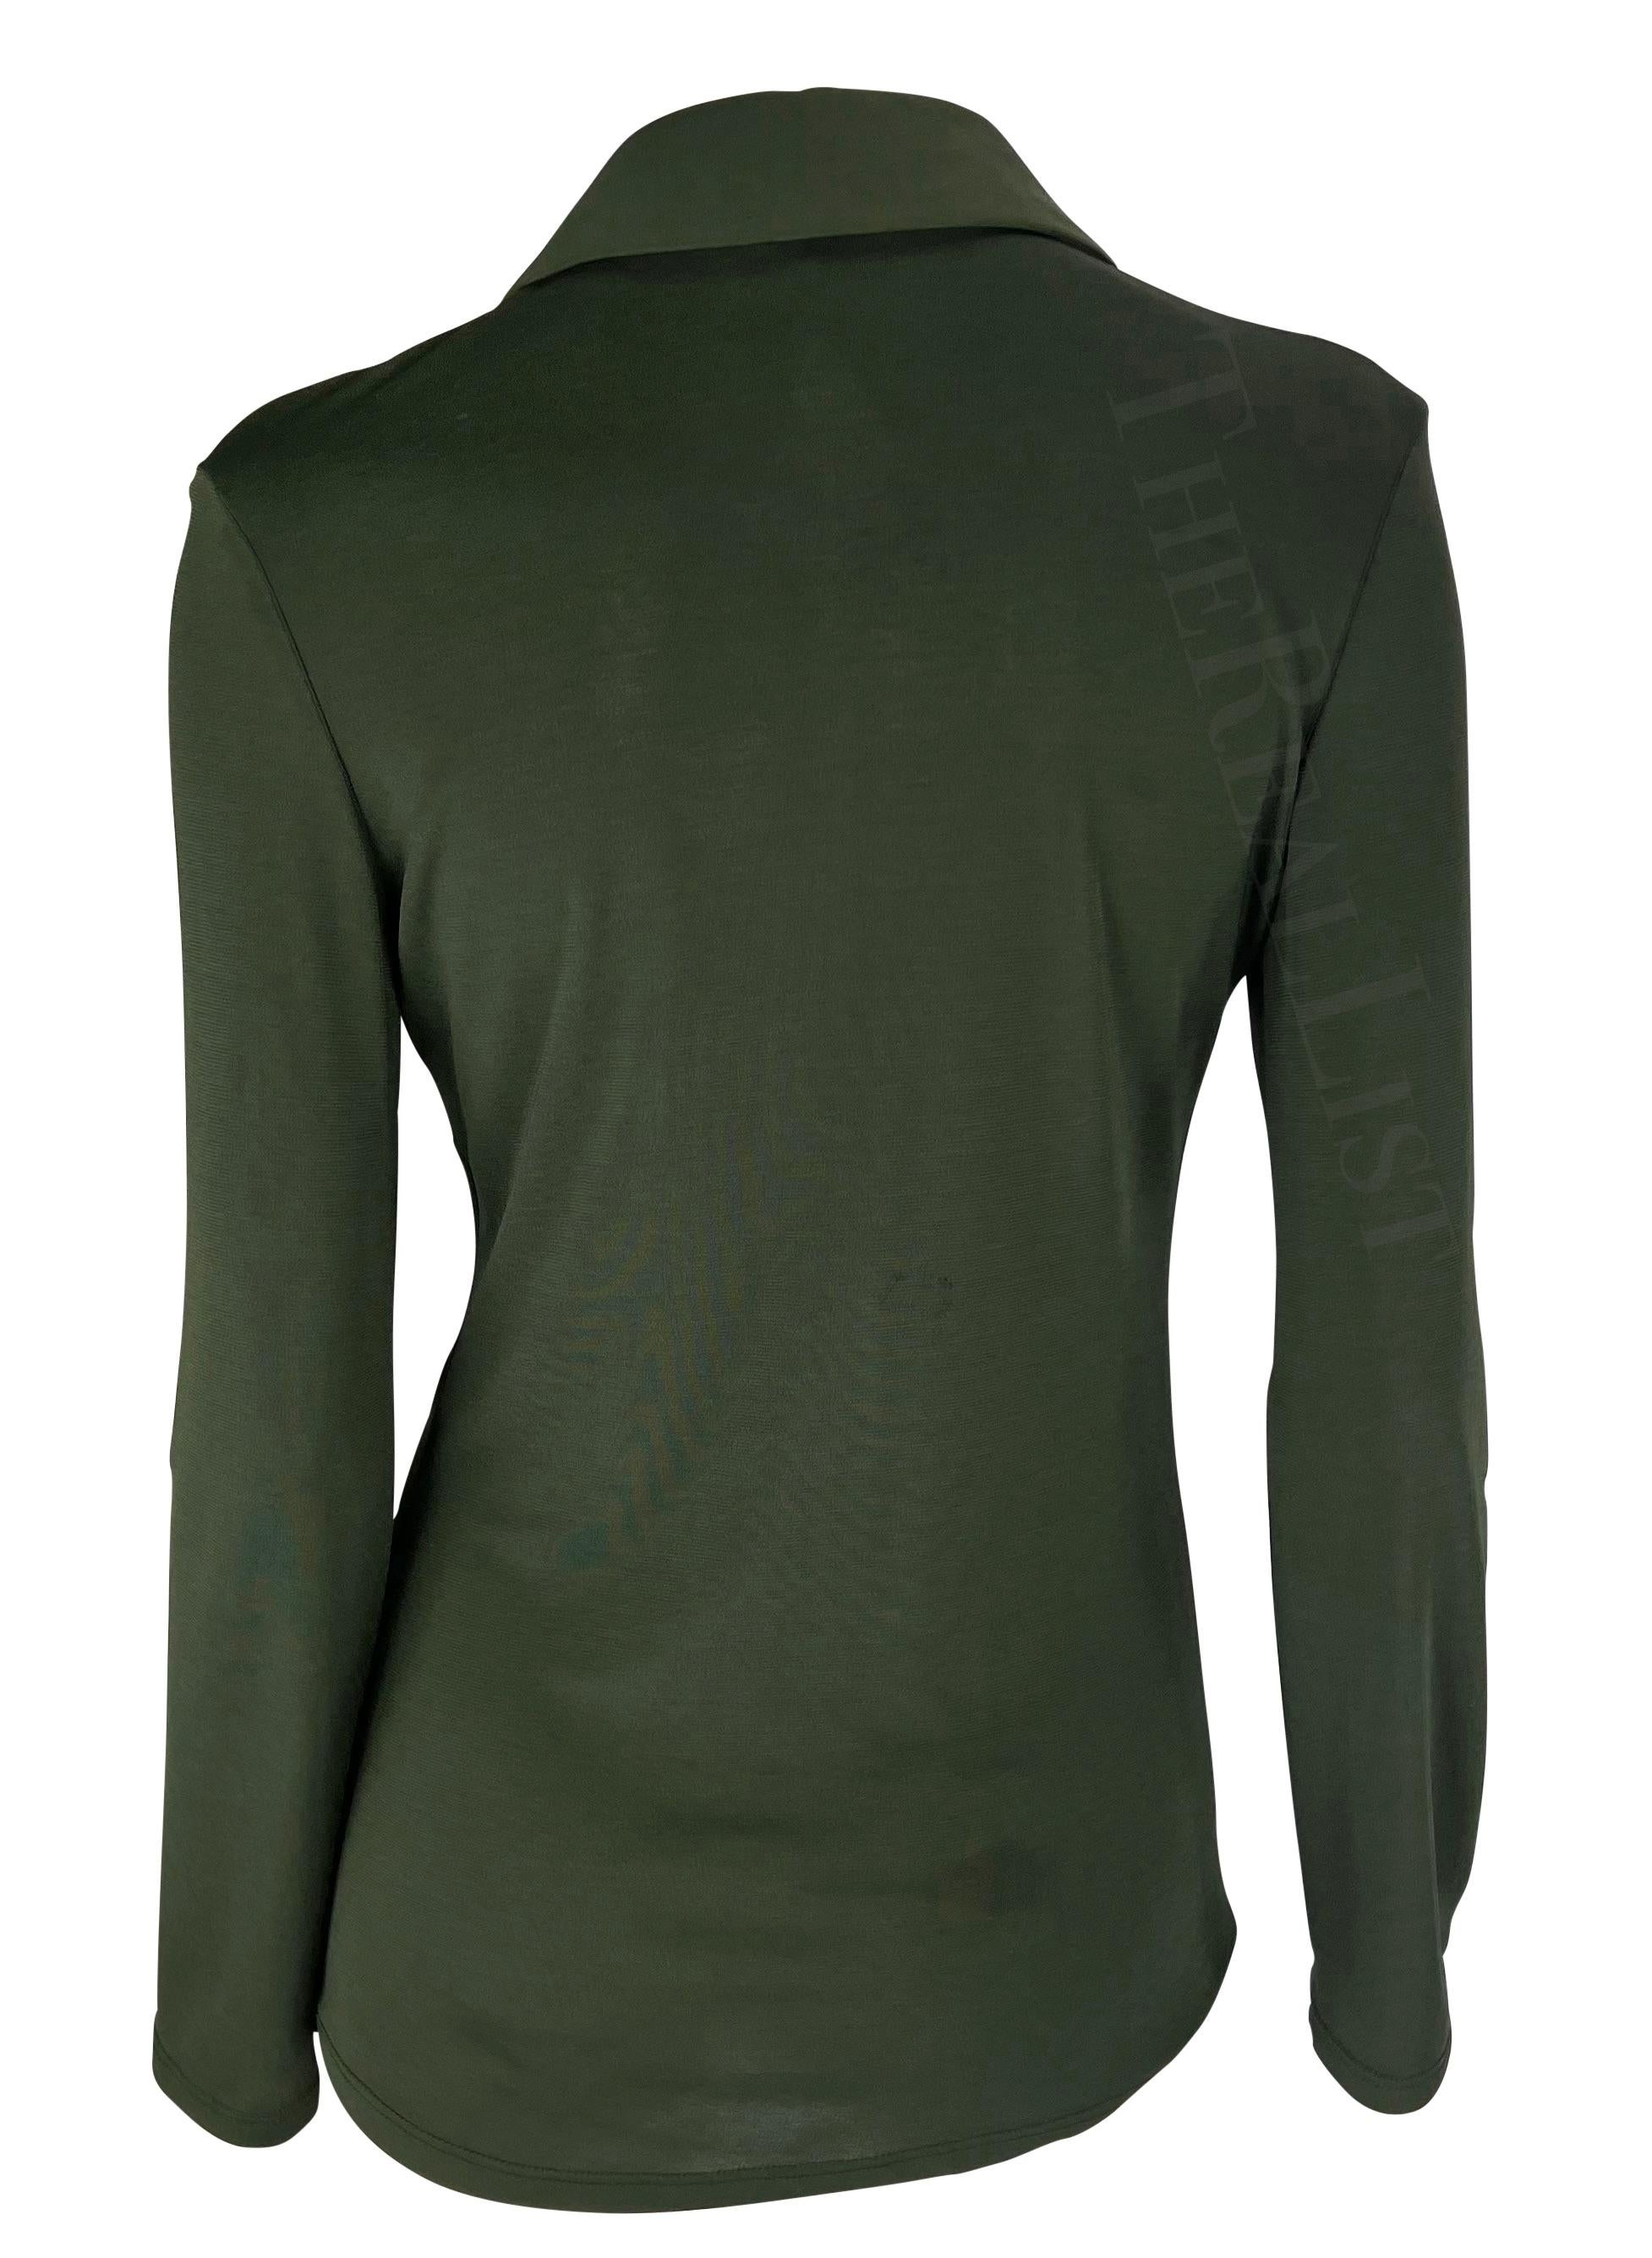 Women's 1996 Gucci by Tom Ford Dark Green Viscose Long Sleeve Collared Shirt For Sale